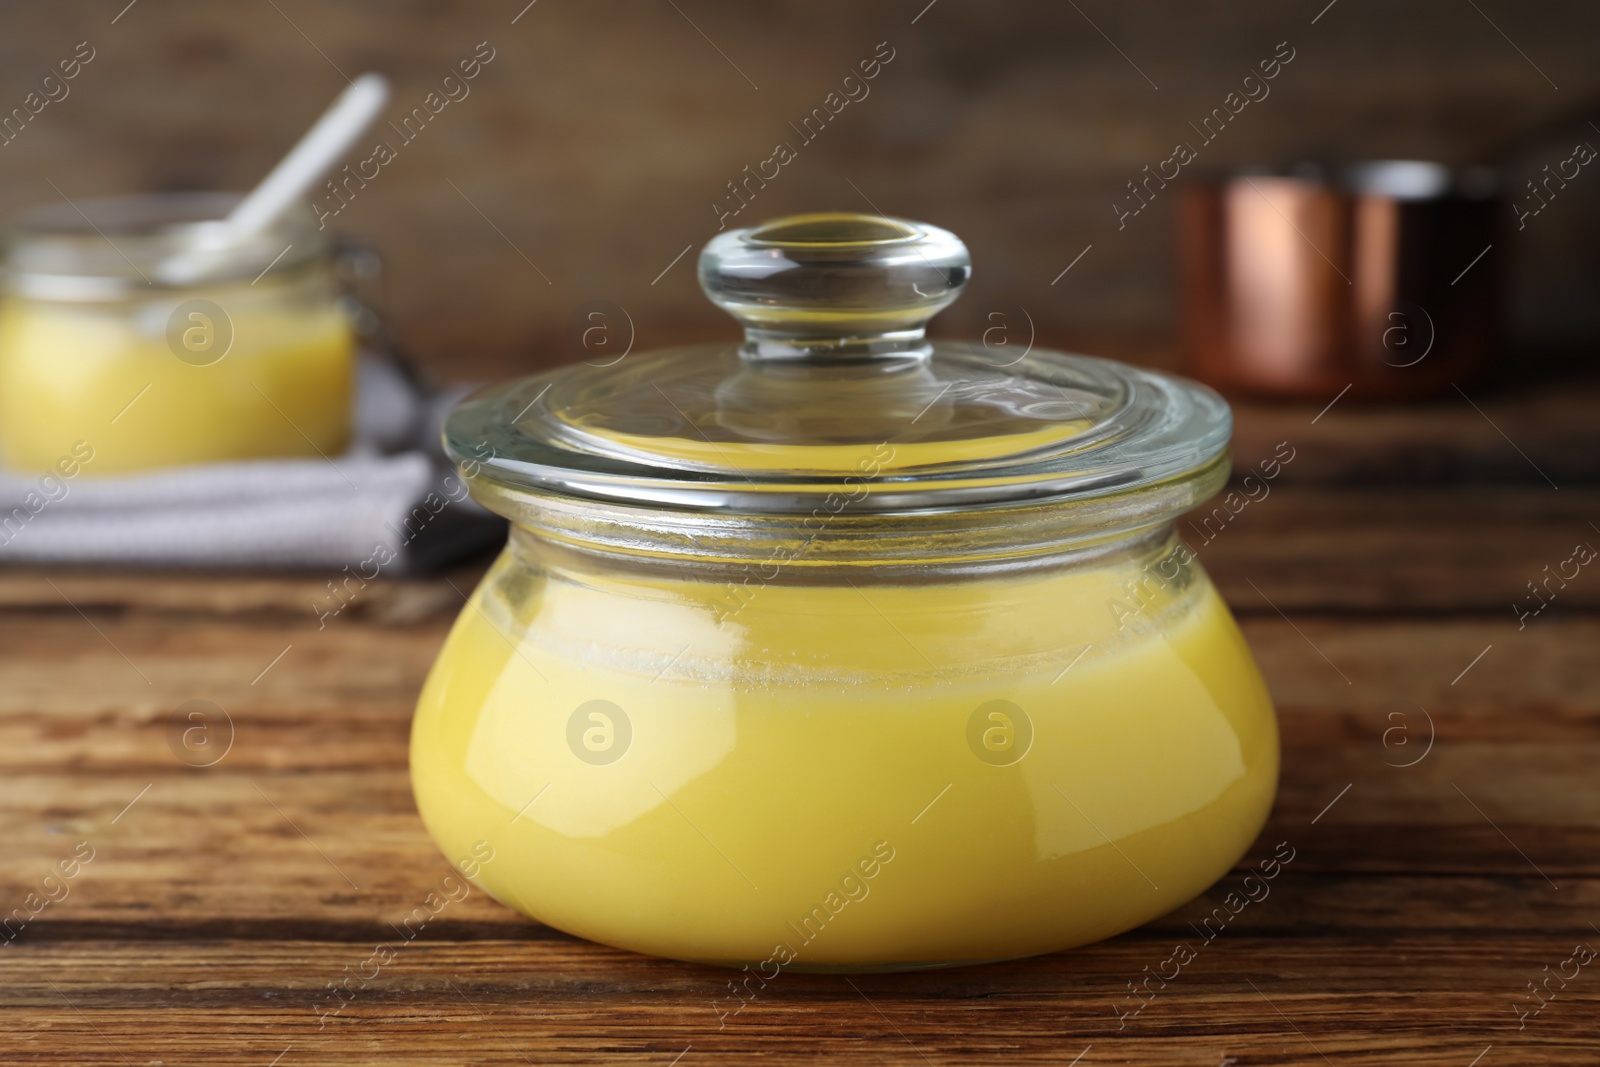 Photo of Glass jar of Ghee butter on wooden table, closeup